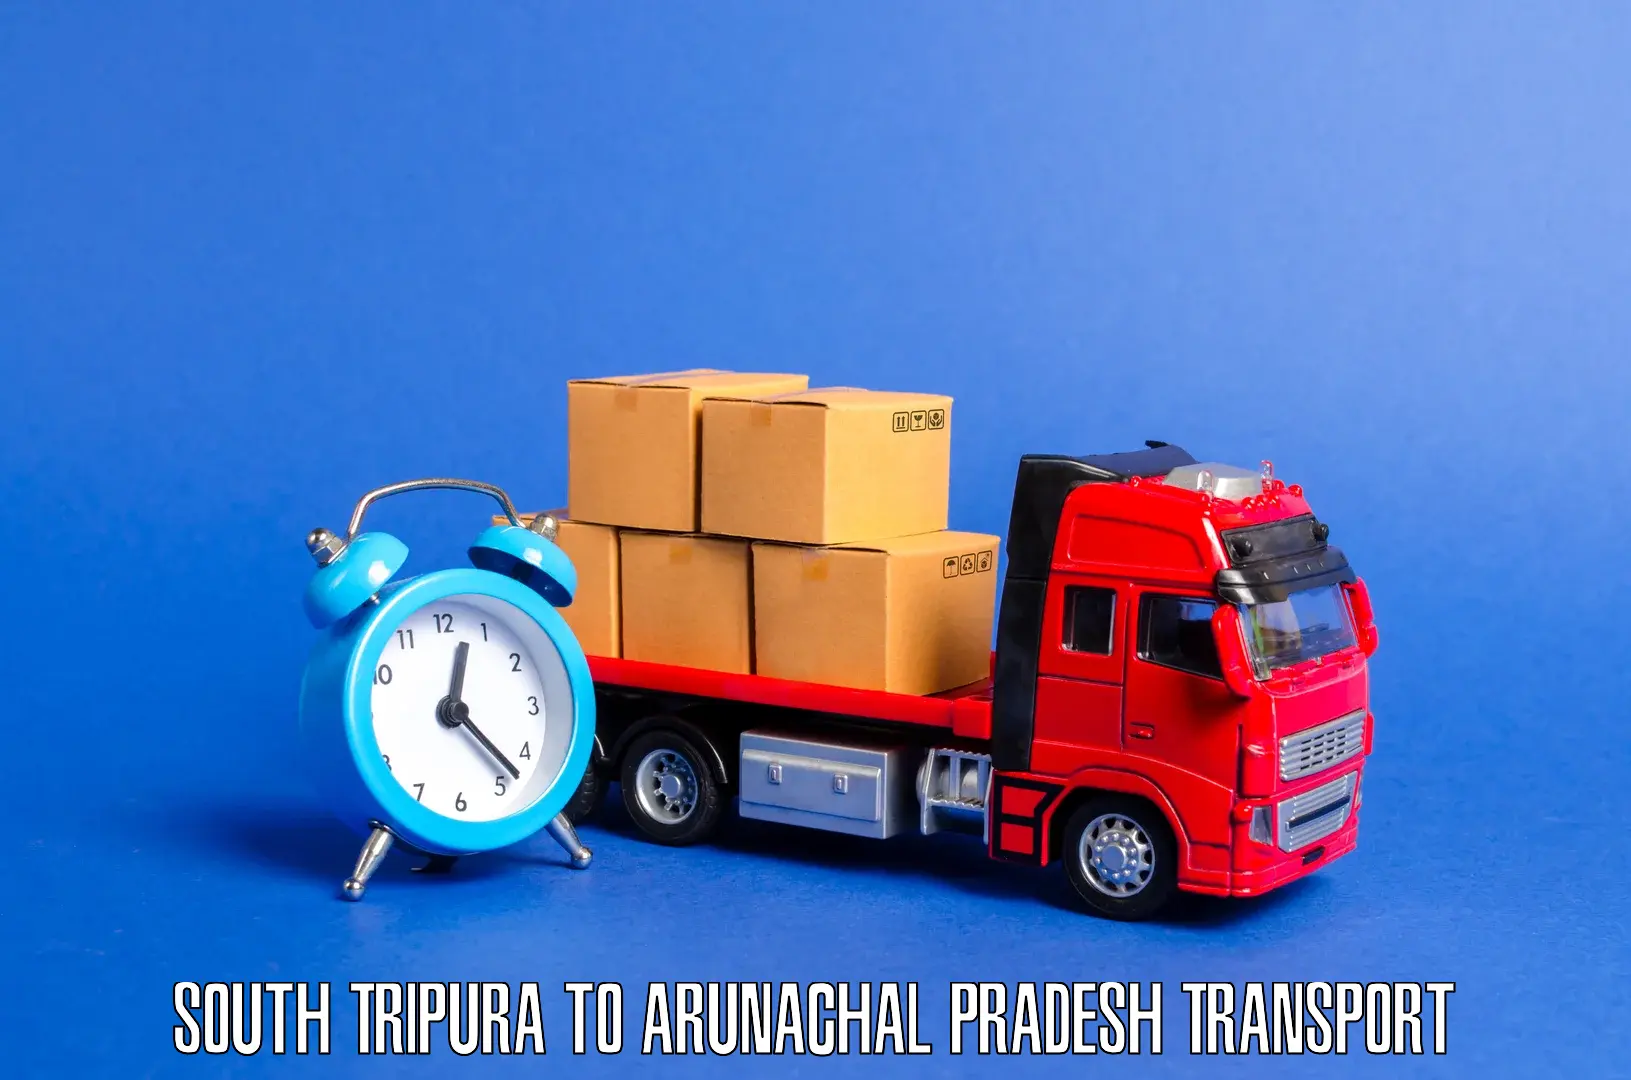 Material transport services South Tripura to West Kameng